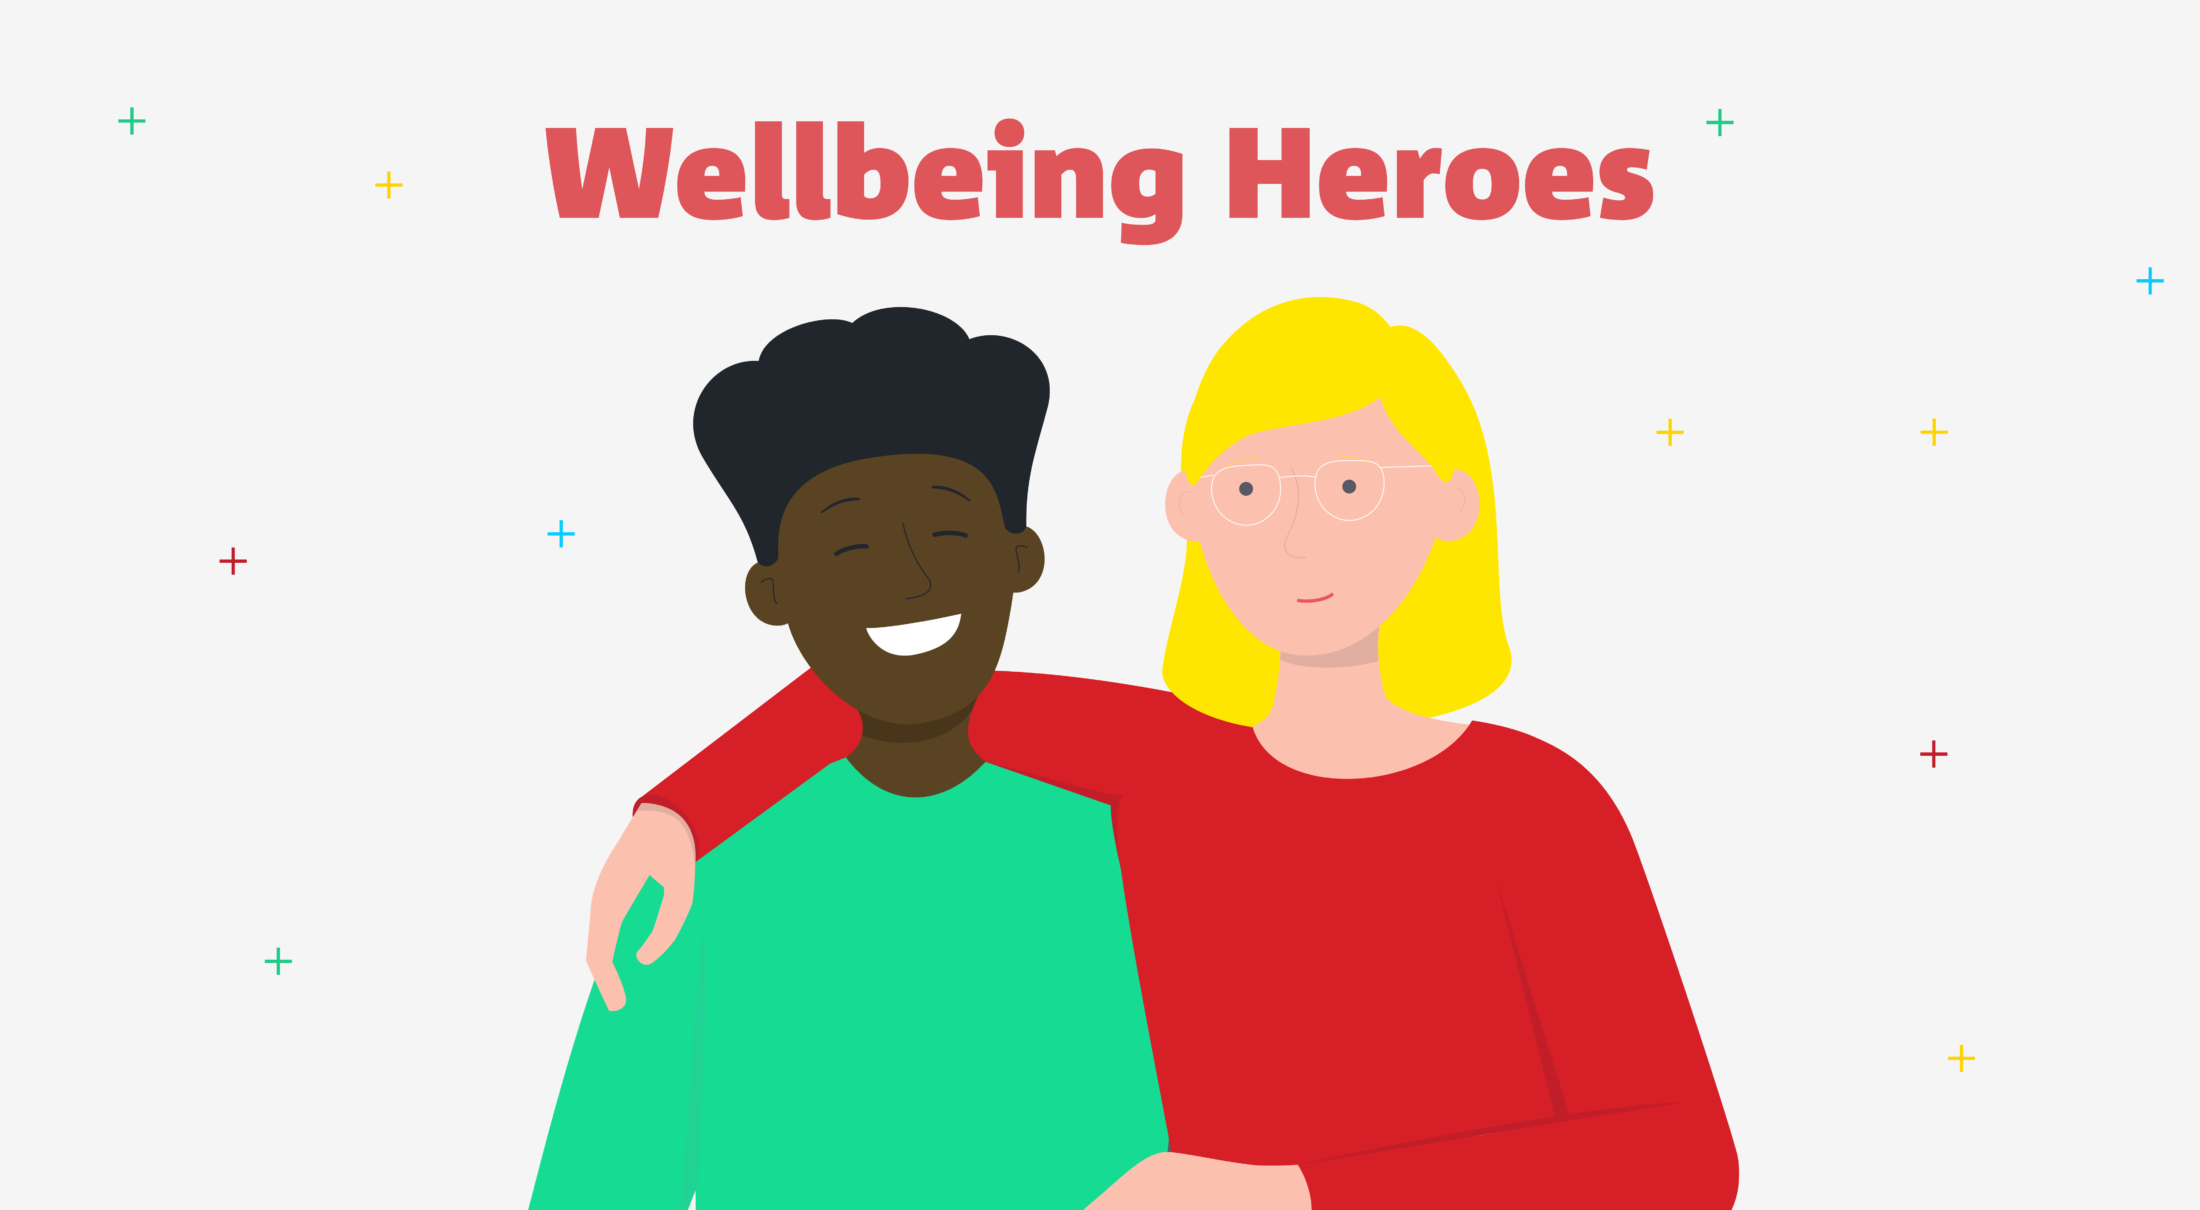 With a little help from my friends: Introducing the Wellbeing Heroes